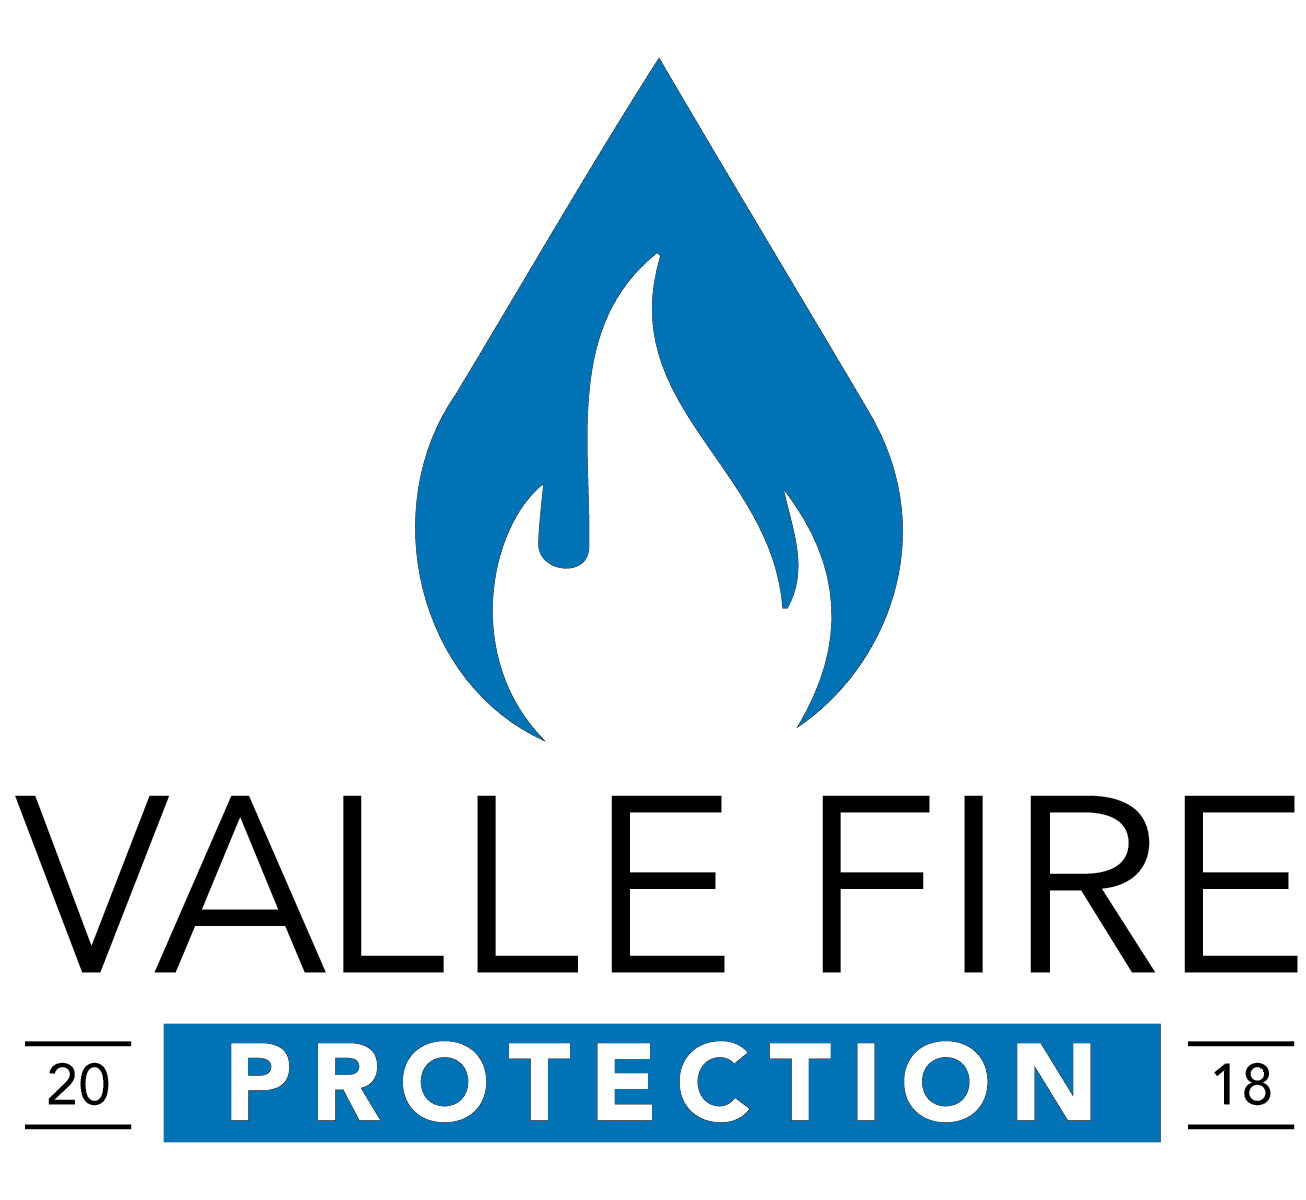 Valle Fire Protection